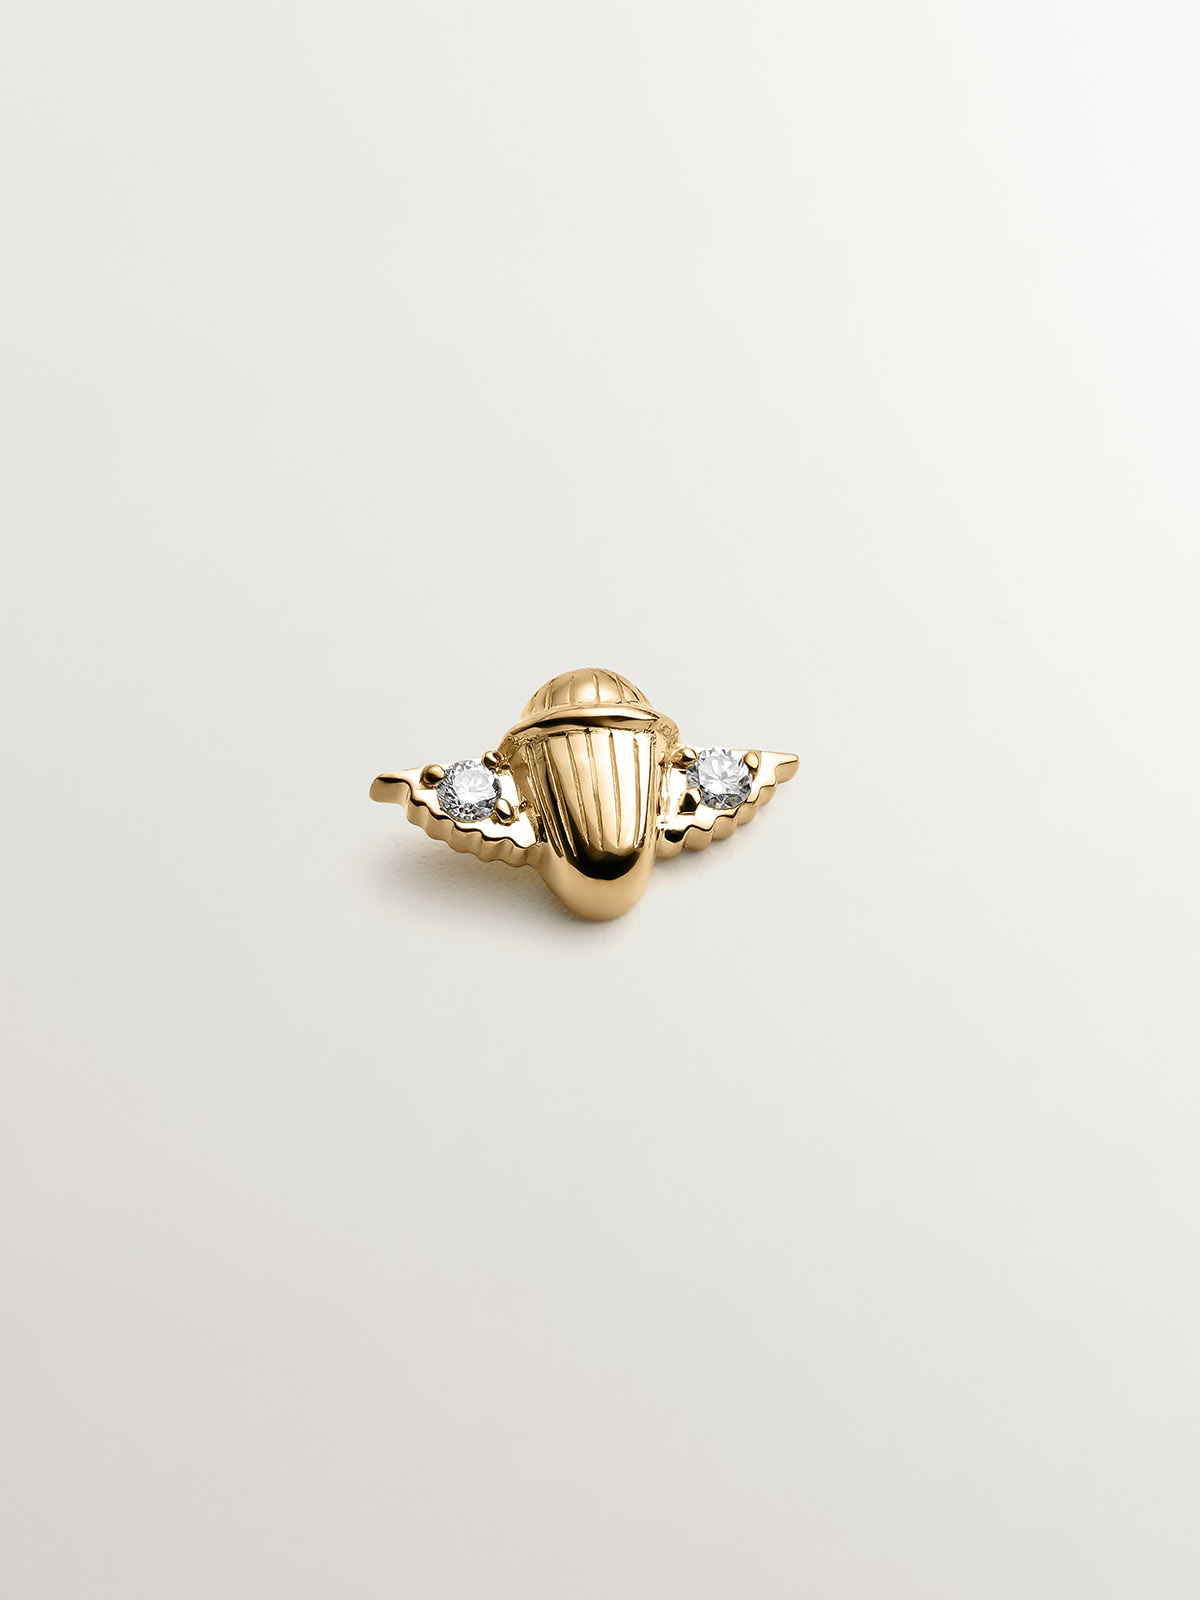 18K yellow gold piercing with diamonds in the shape of a beetle.